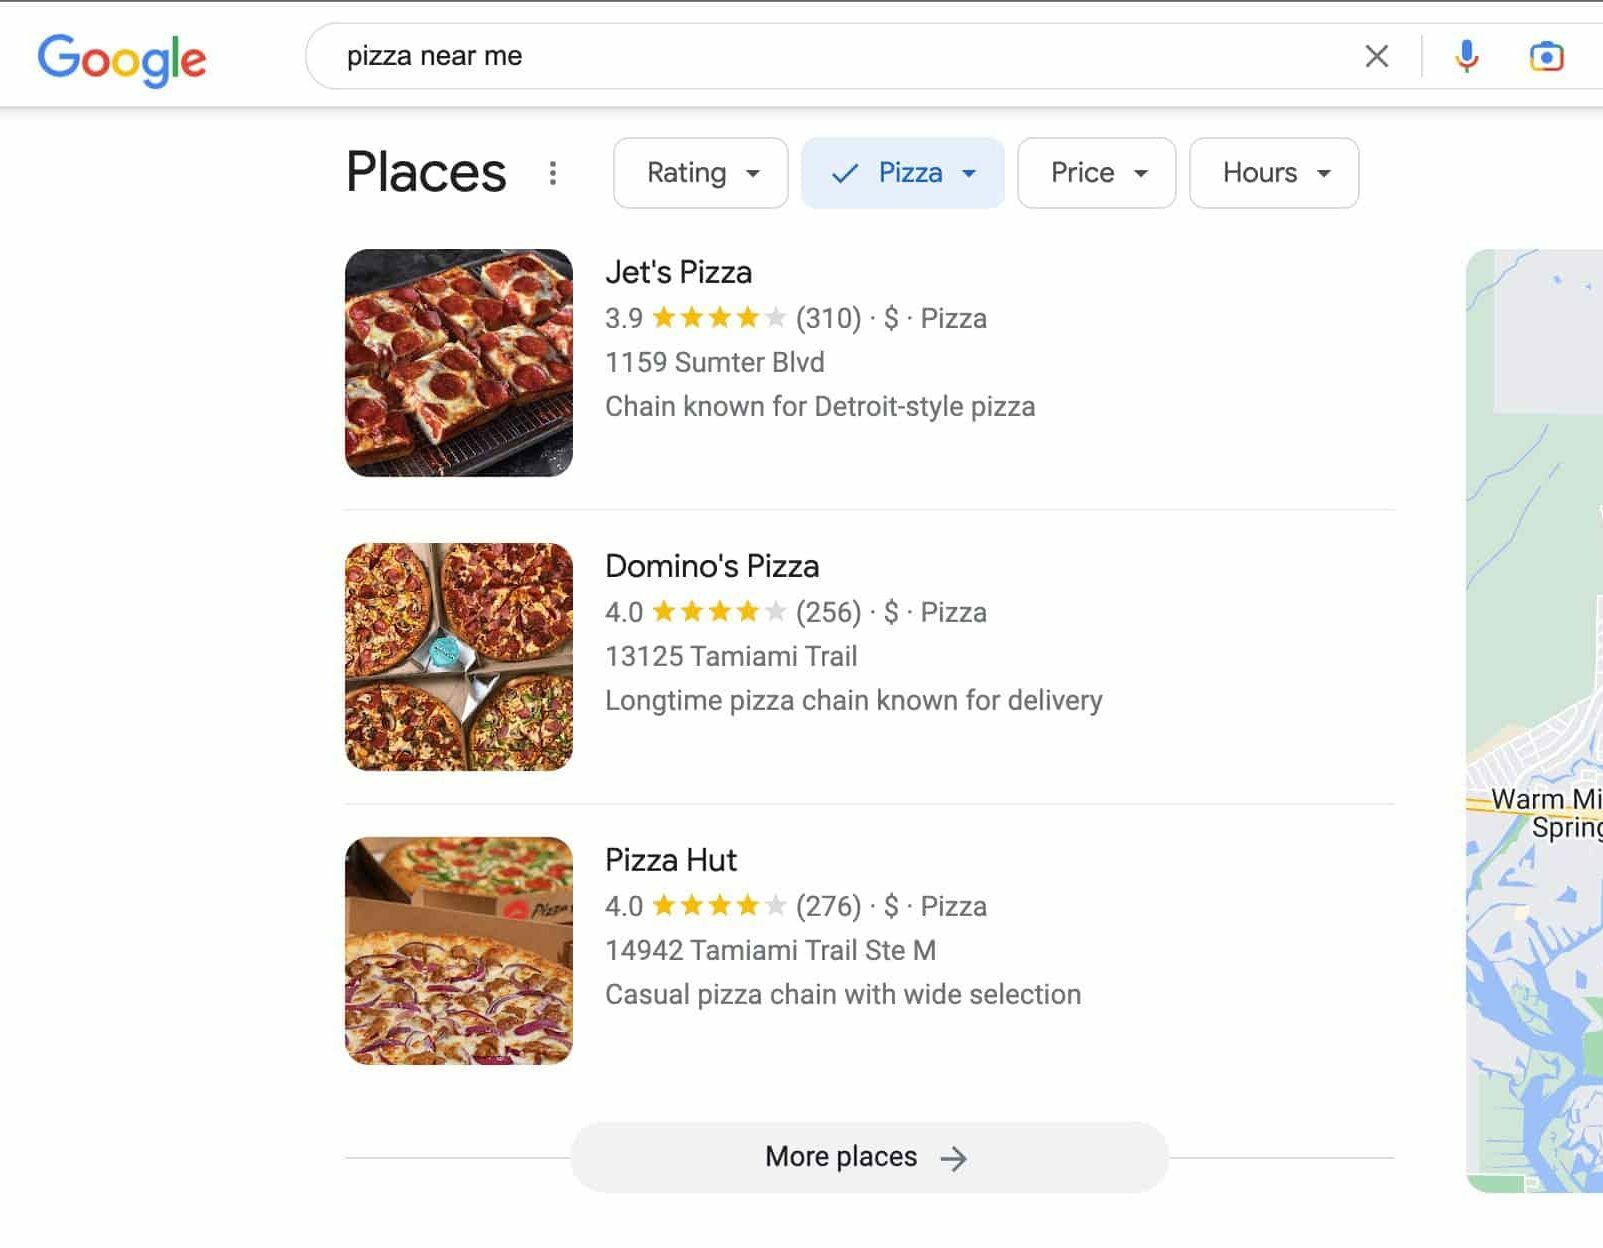 screenshot of google search 'pizza near me' pertaining to North Port, FL